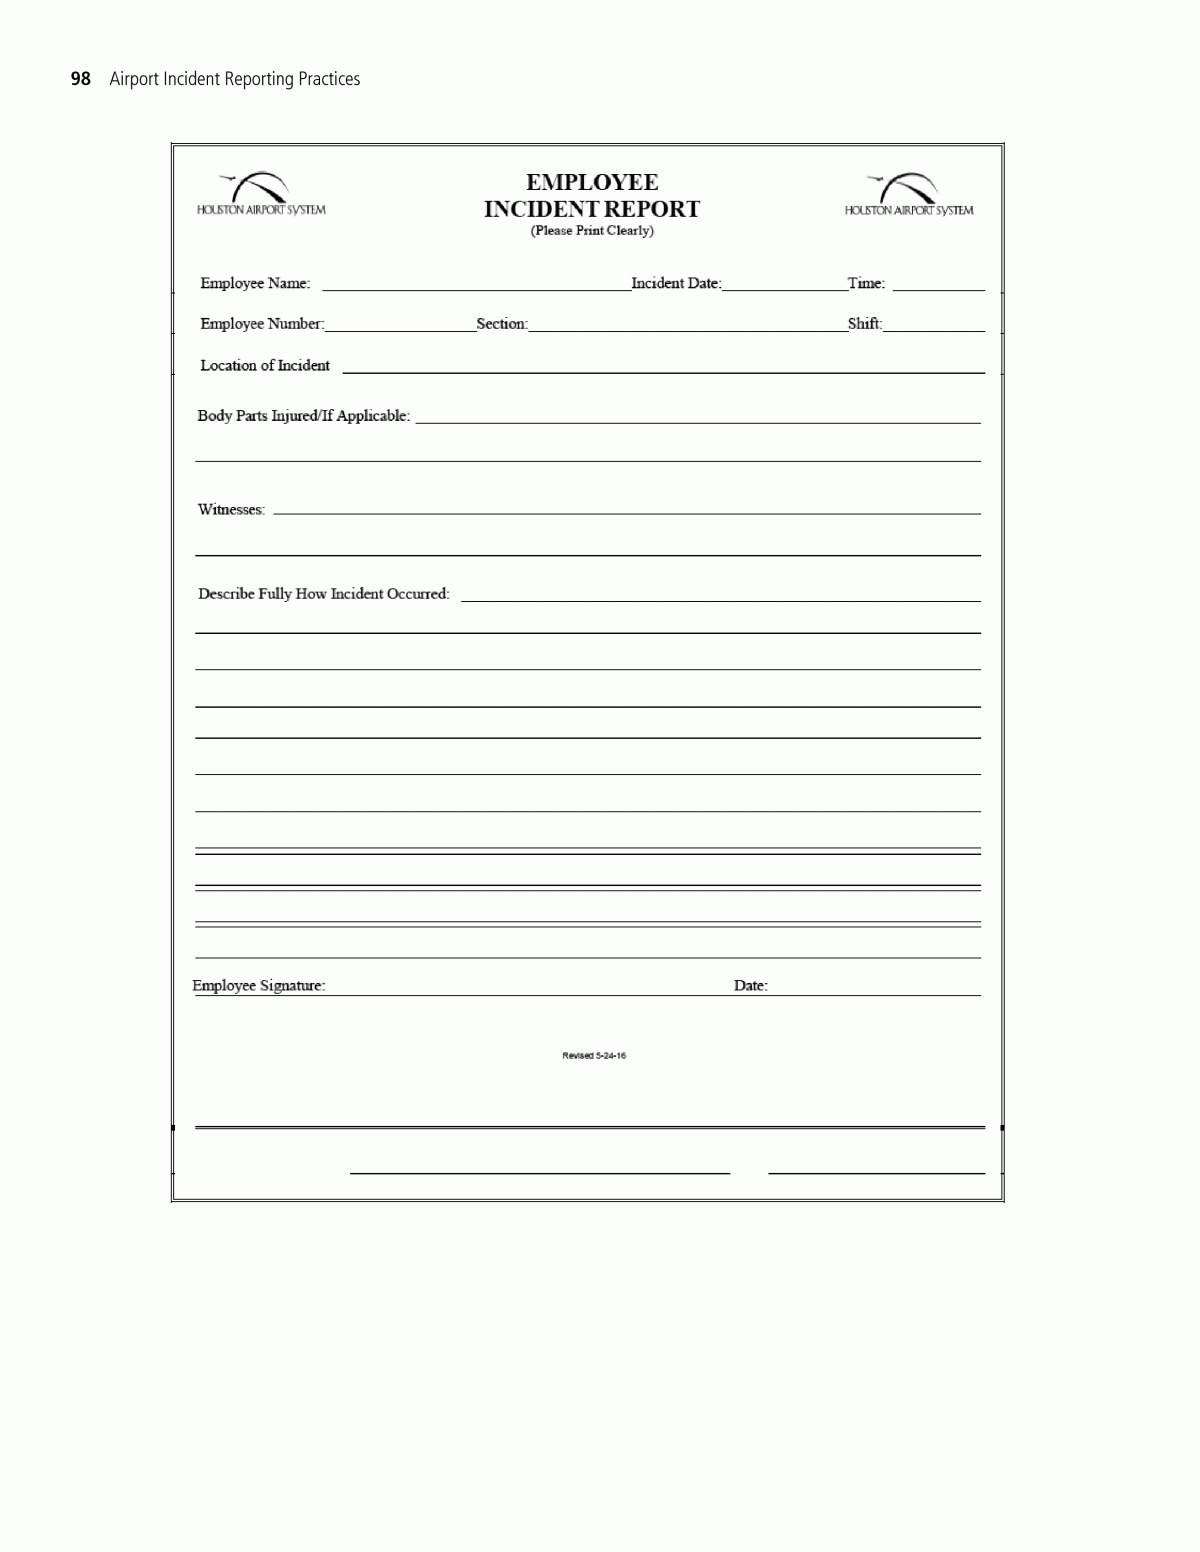 Appendix H - Sample Employee Incident Report Form | Airport Pertaining To Injury Report Form Template